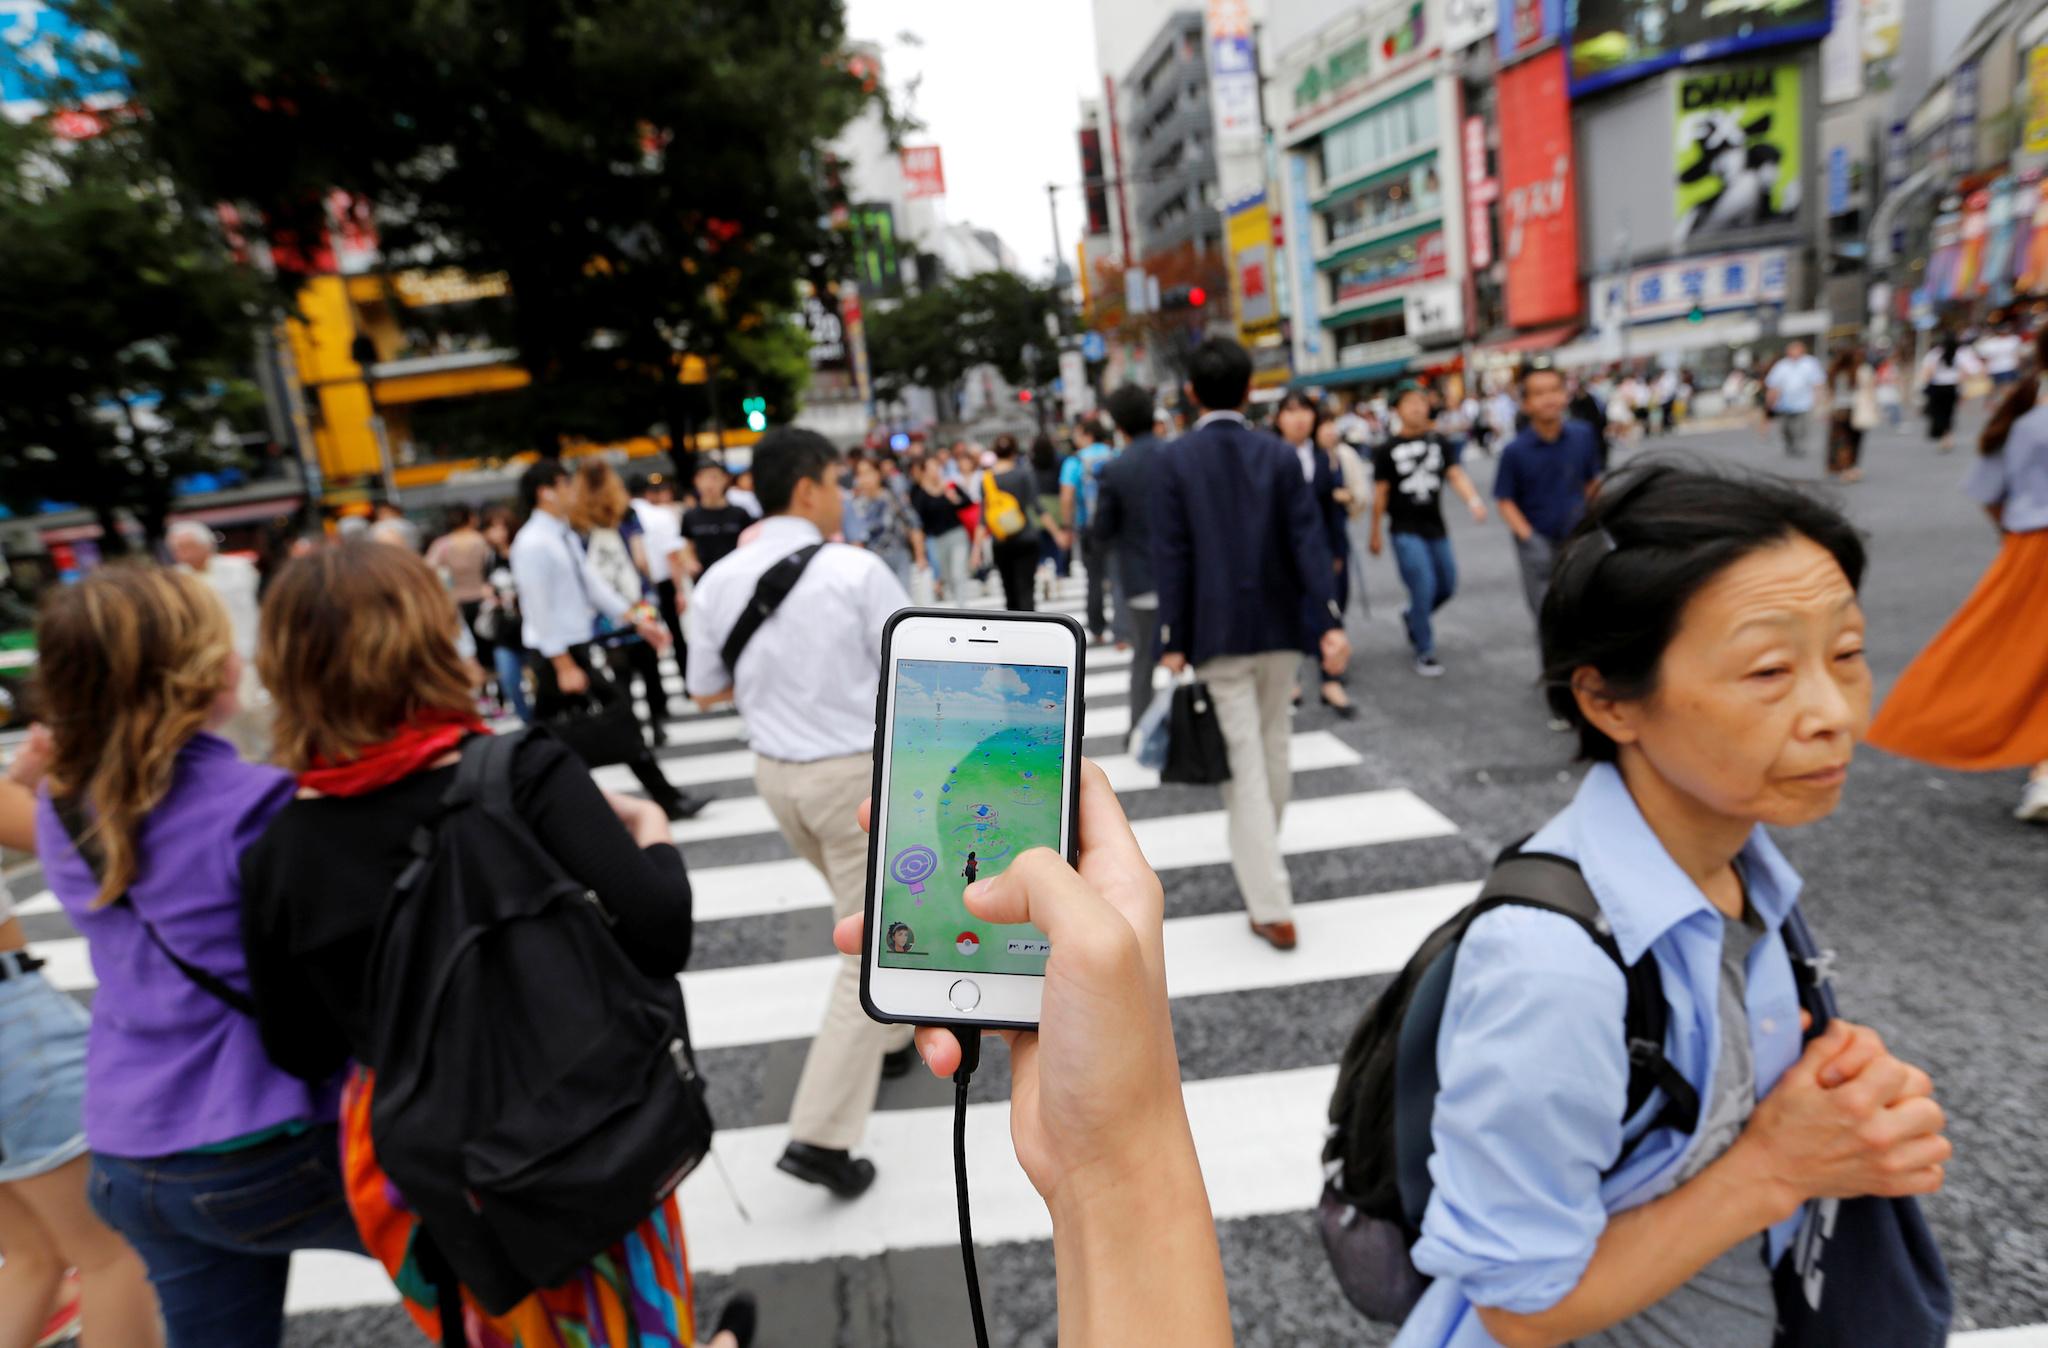 A man plays the augmented reality mobile game "Pokemon Go" by Nintendo on his mobile phone as he walks at a busy crossing in Shibuya district in Tokyo, Japan